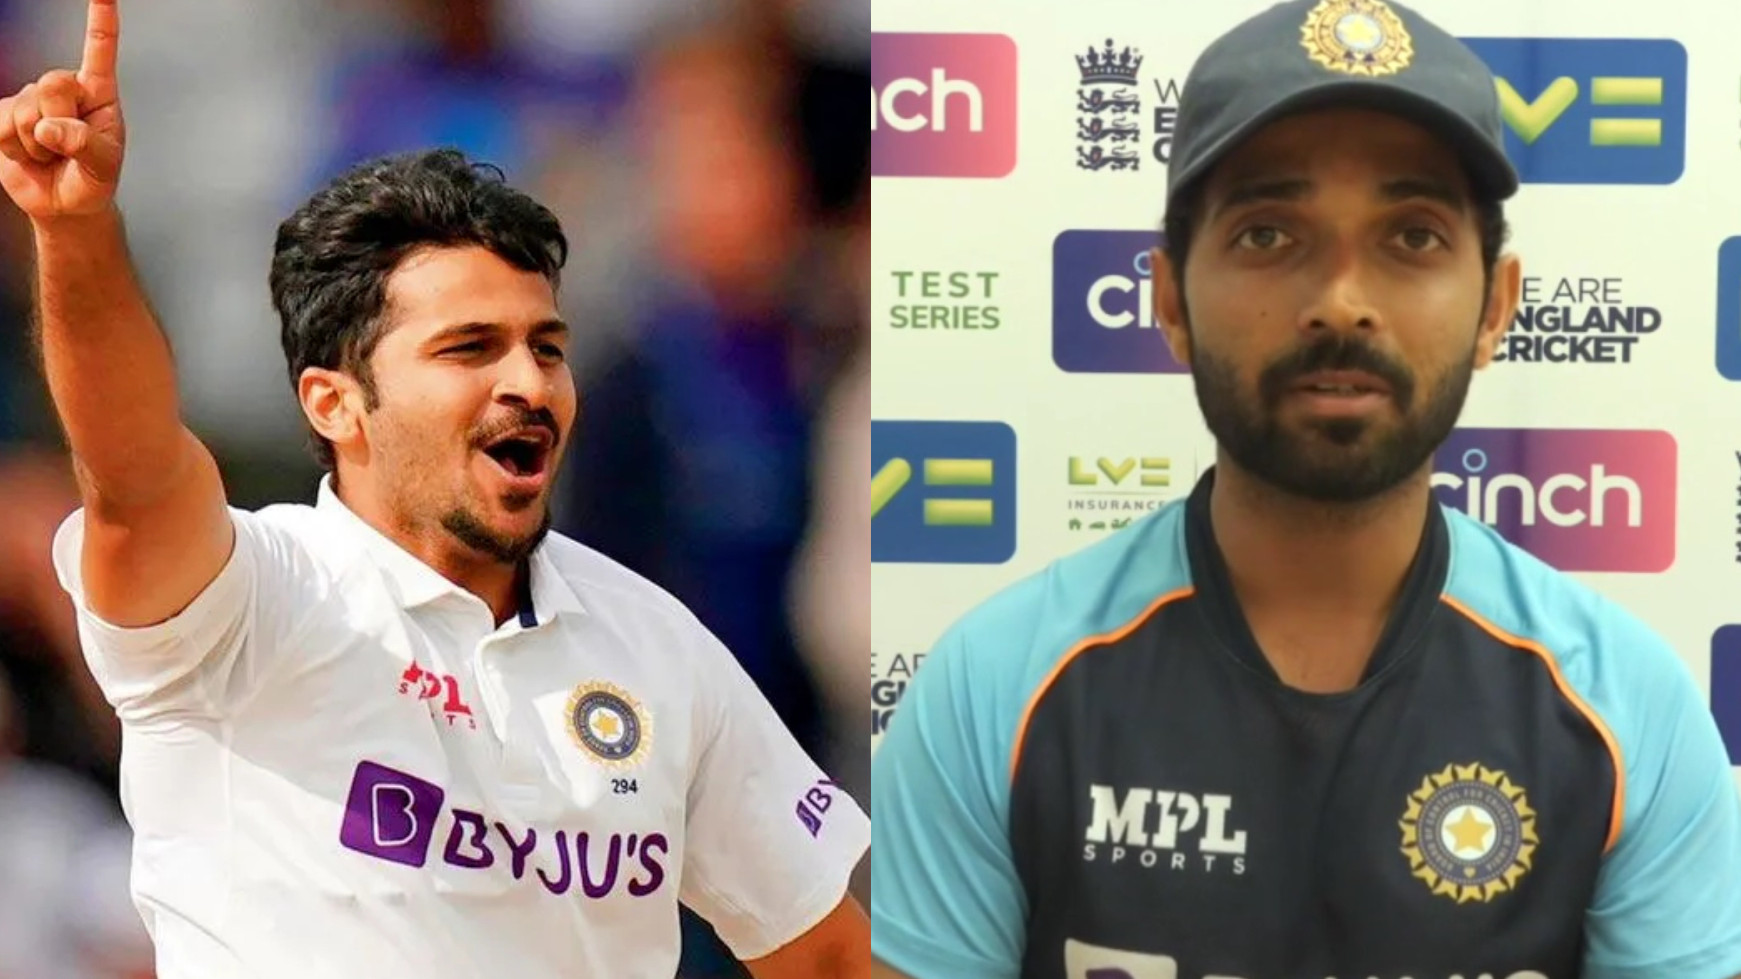 ENG v IND 2021: Shardul Thakur fit and available for the third Test confirms Ajinkya Rahane